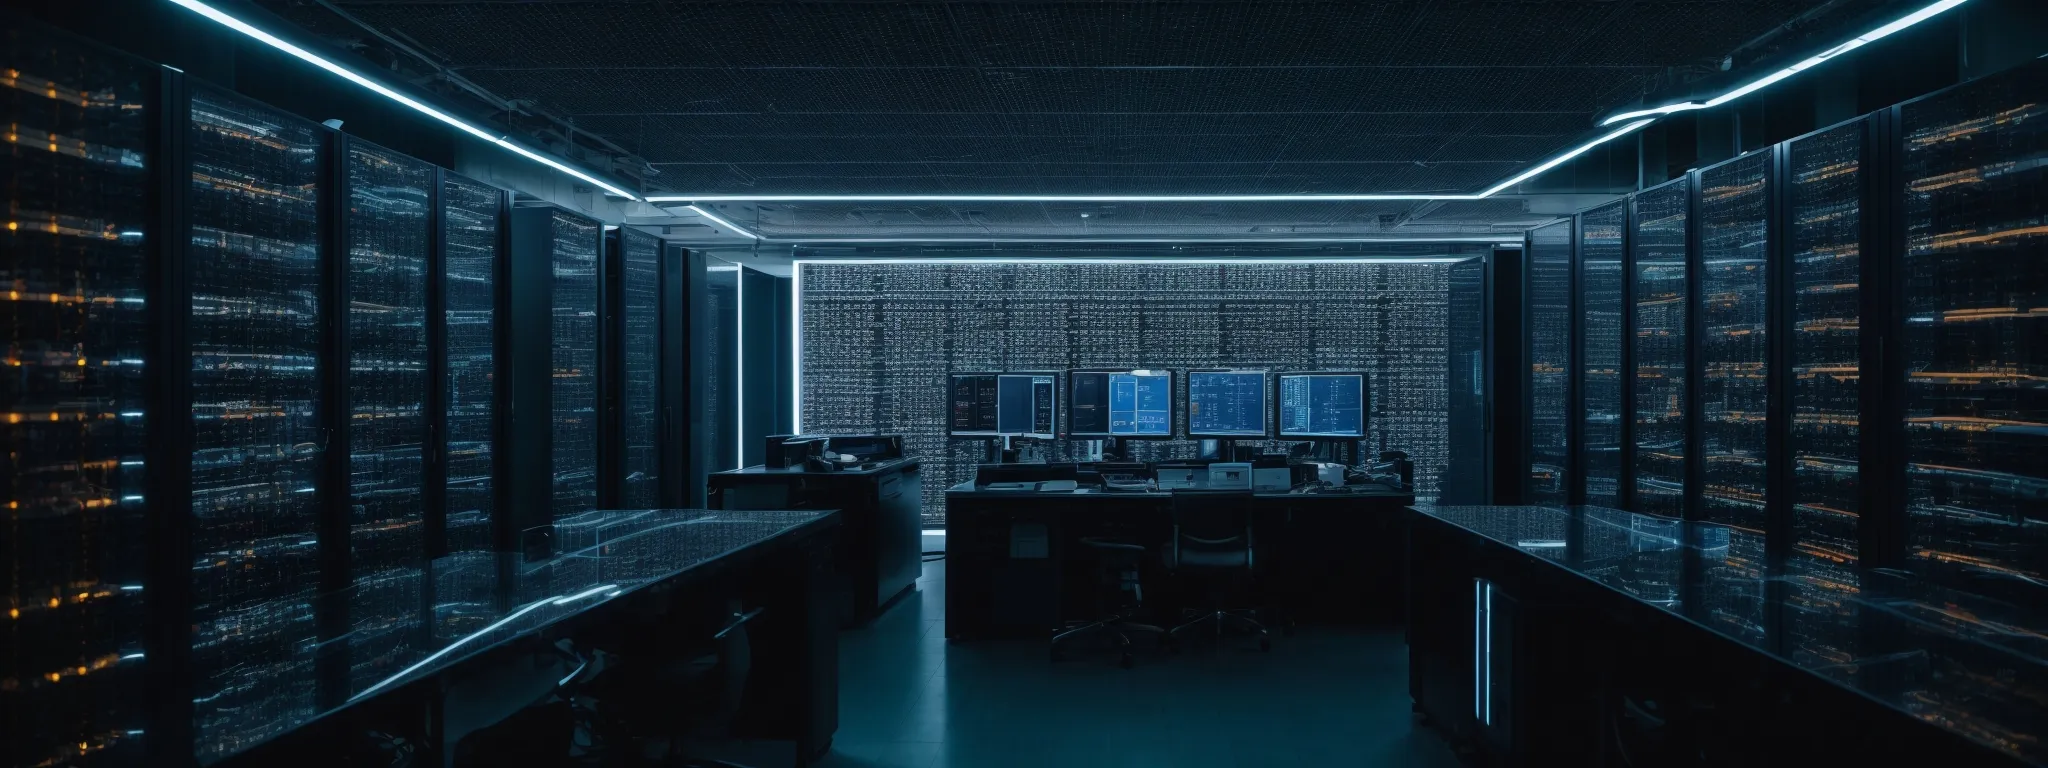 a wide shot of a light-filled, modern server room with rows of high-end computers interfacing with a global network to symbolize the digital process of search engine rendering.